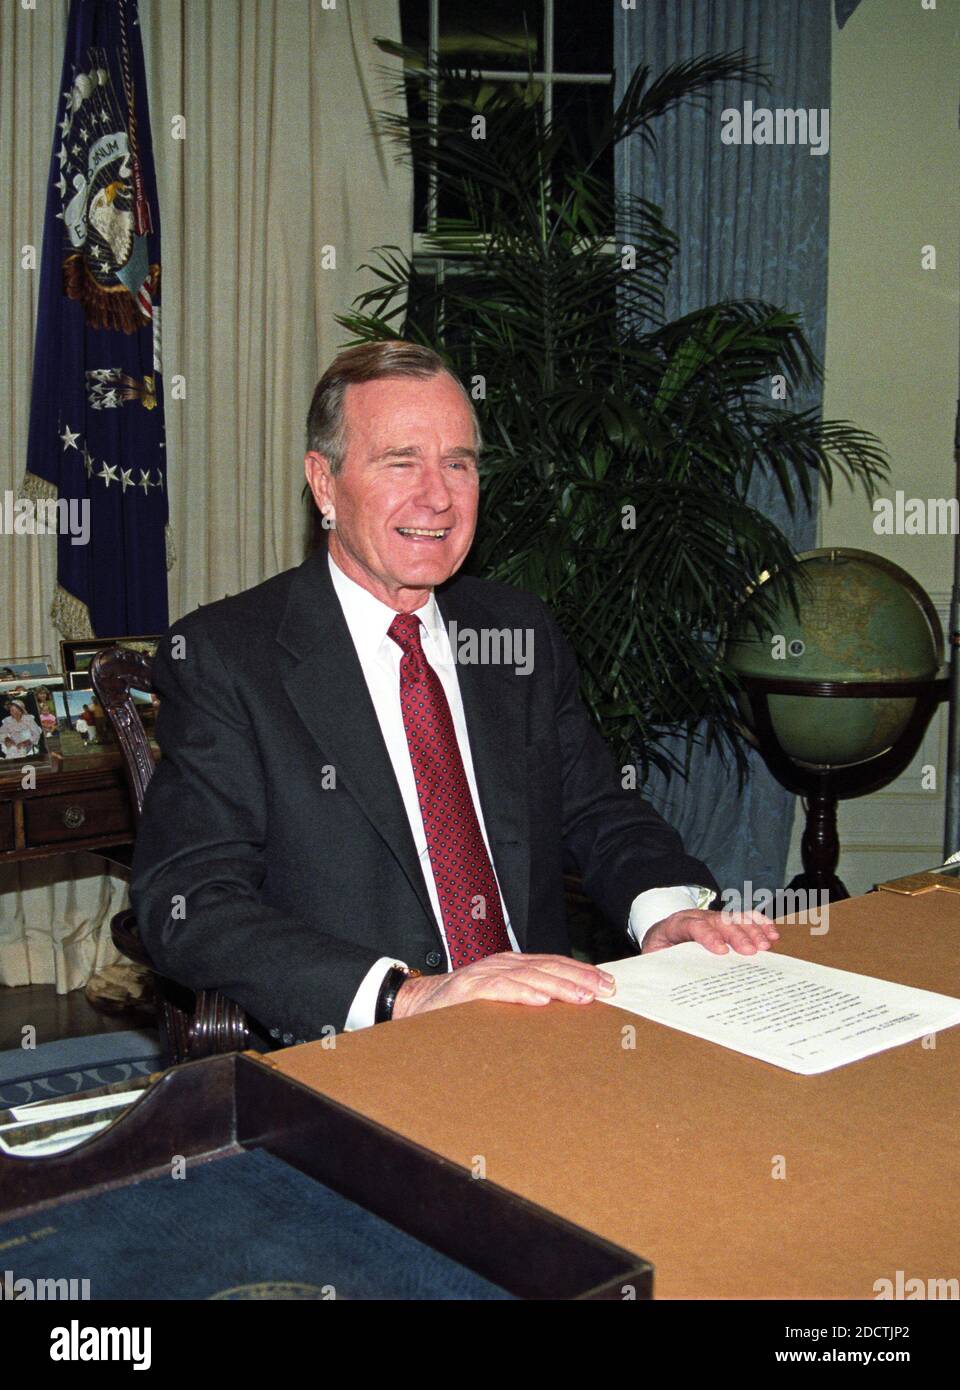 United States President George H.W. Bush poses for photographers after delivering an address to the nation from the Oval Office of the White House in Washington, DC on Christmas Day, December 25, 1991 announcing the resignation of President Mikhail Gorbachev as President of the Union of Soviet Socialist Republics, marking the collapse of the Soviet Union and the end of the Cold War. Photo by Arnie Sachs / CNP /ABACAPRESSC.OM Stock Photo